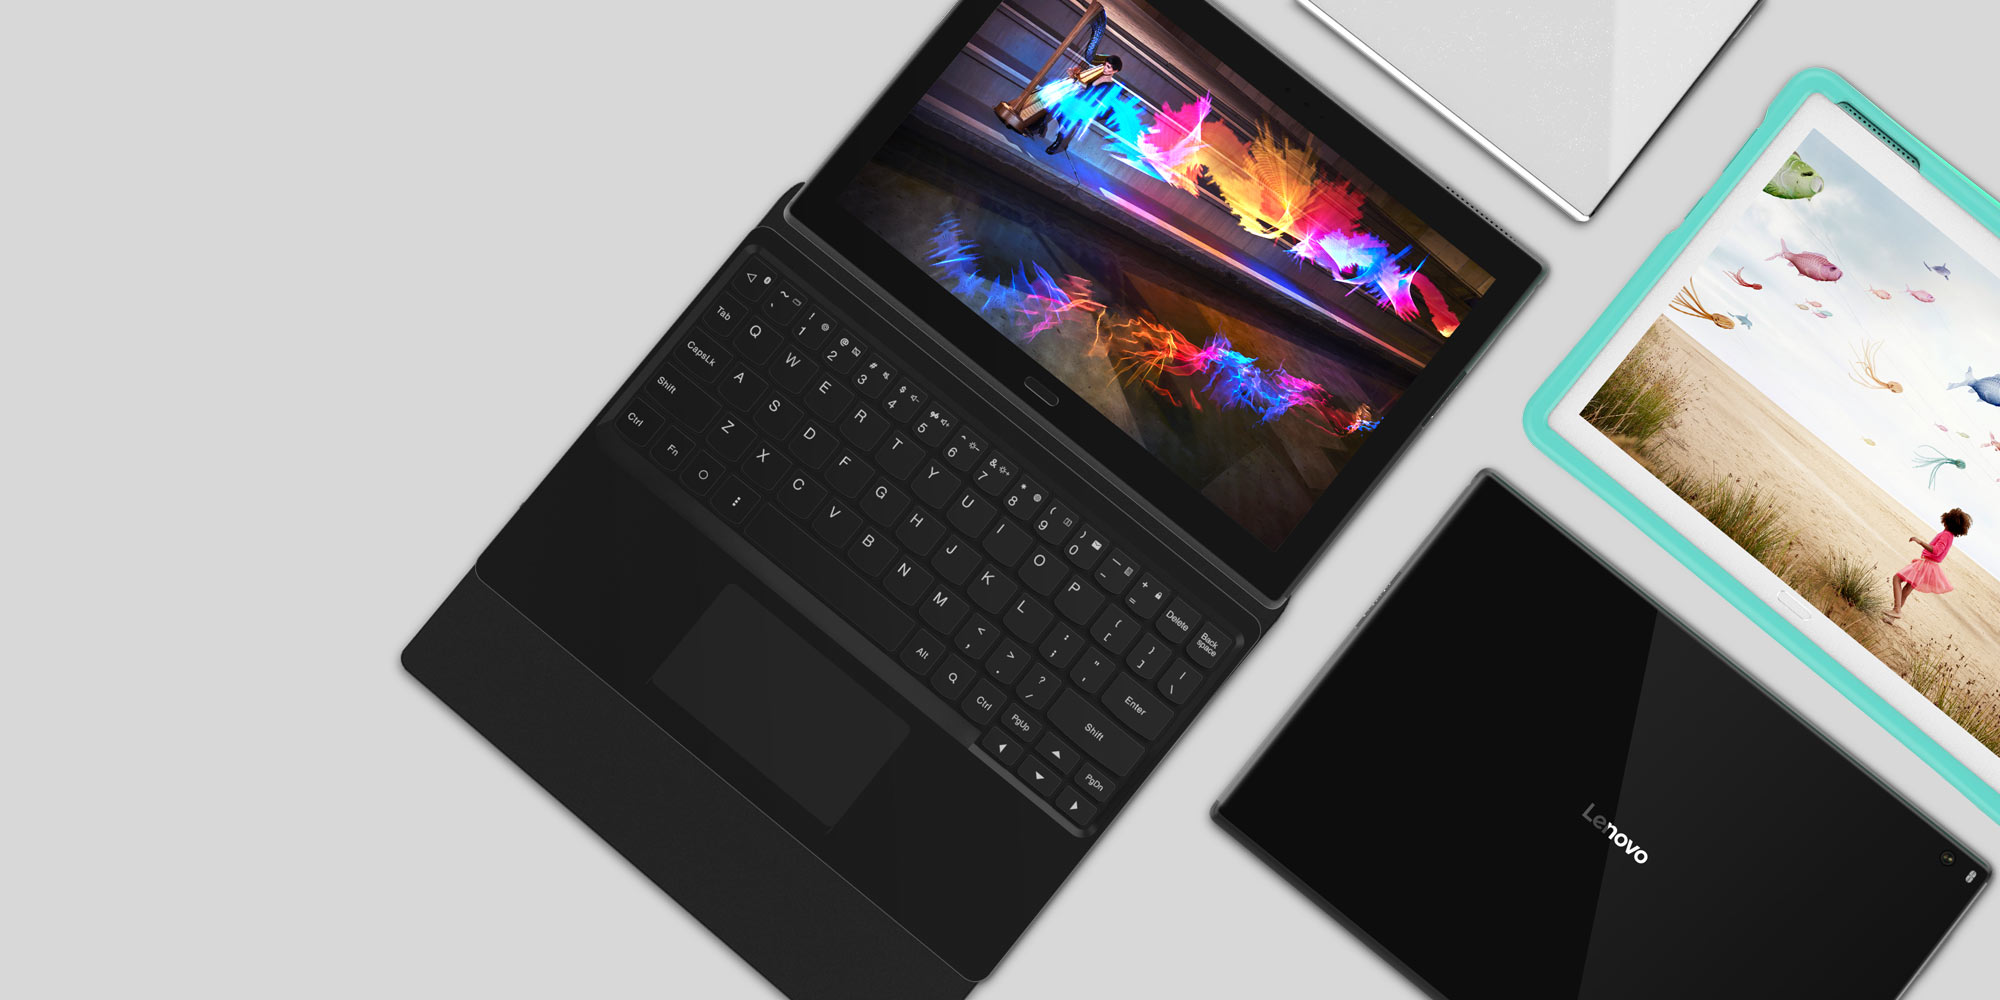 MWC 2017: Lenovo introduces its new Tab 4 series, Miix 320, Yoga 720 and 520 notebooks